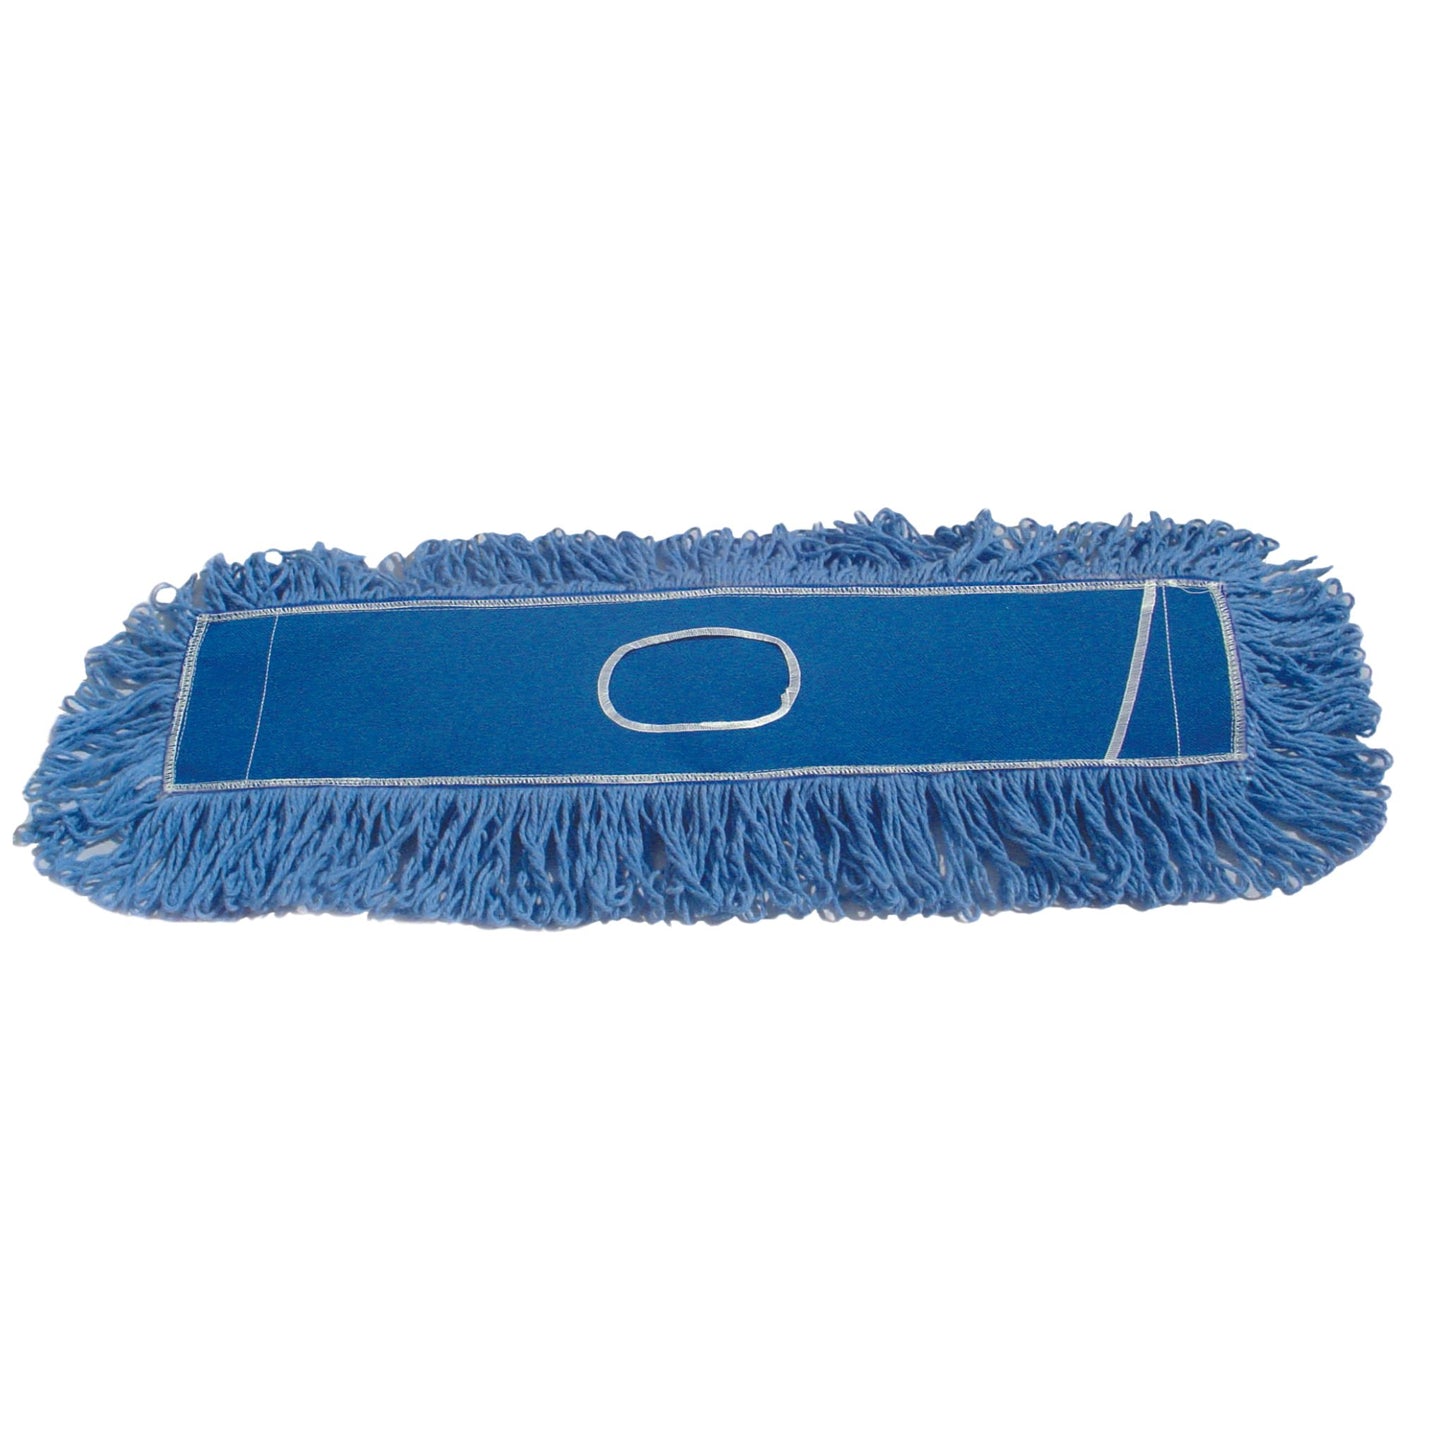 Better - Looped End Dust Mop For Healthcare